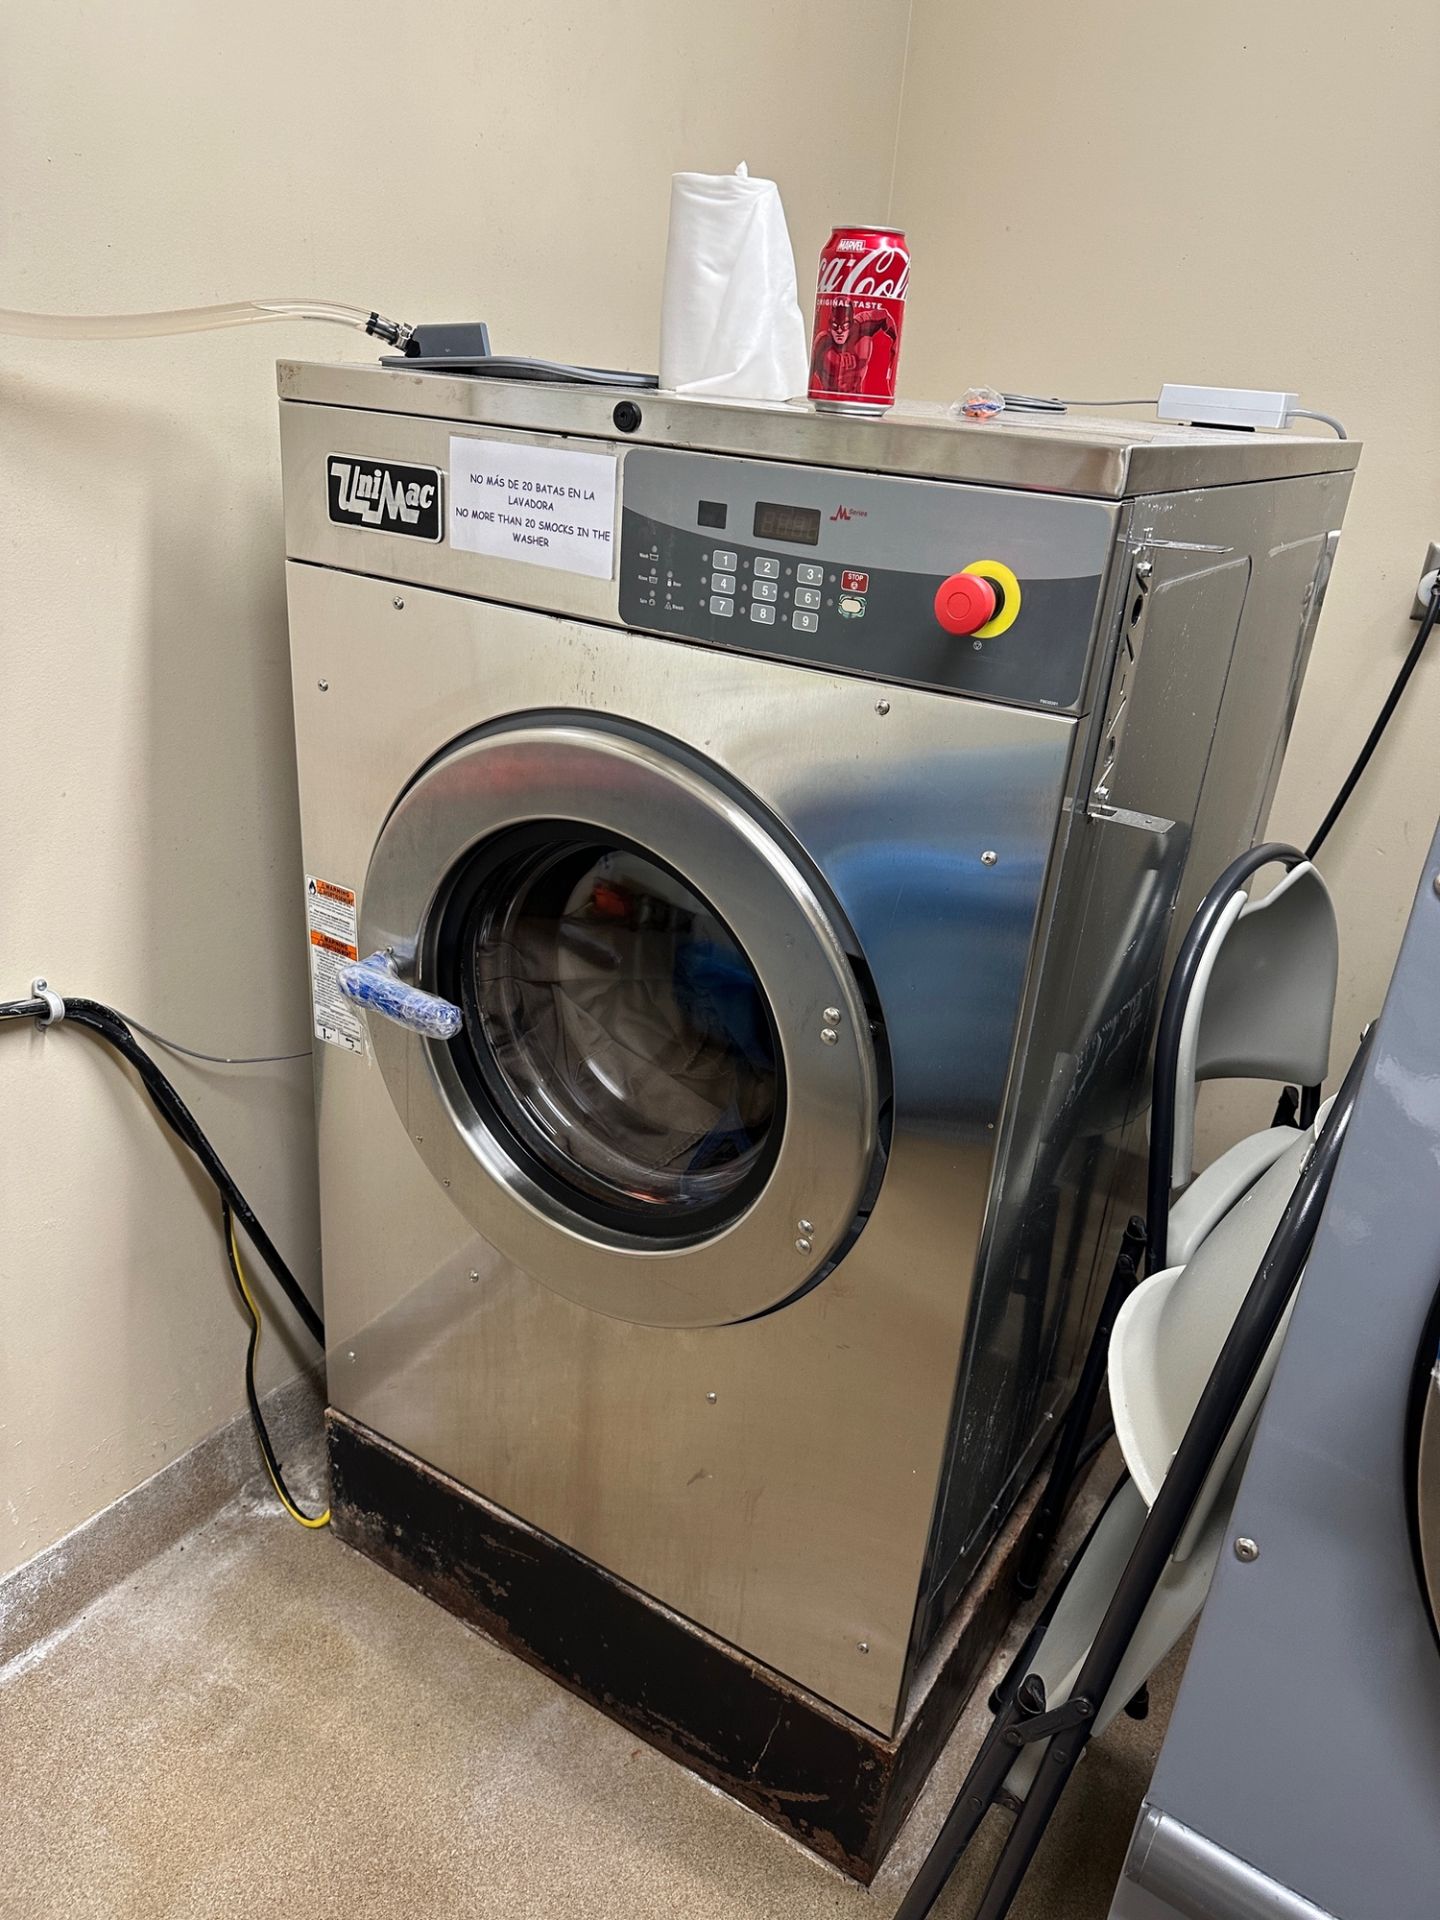 Daniels OptiDry Industrial Clothes Dryer & UniMac Industrial Clothes Washer | Rig Fee $200 - Image 5 of 6